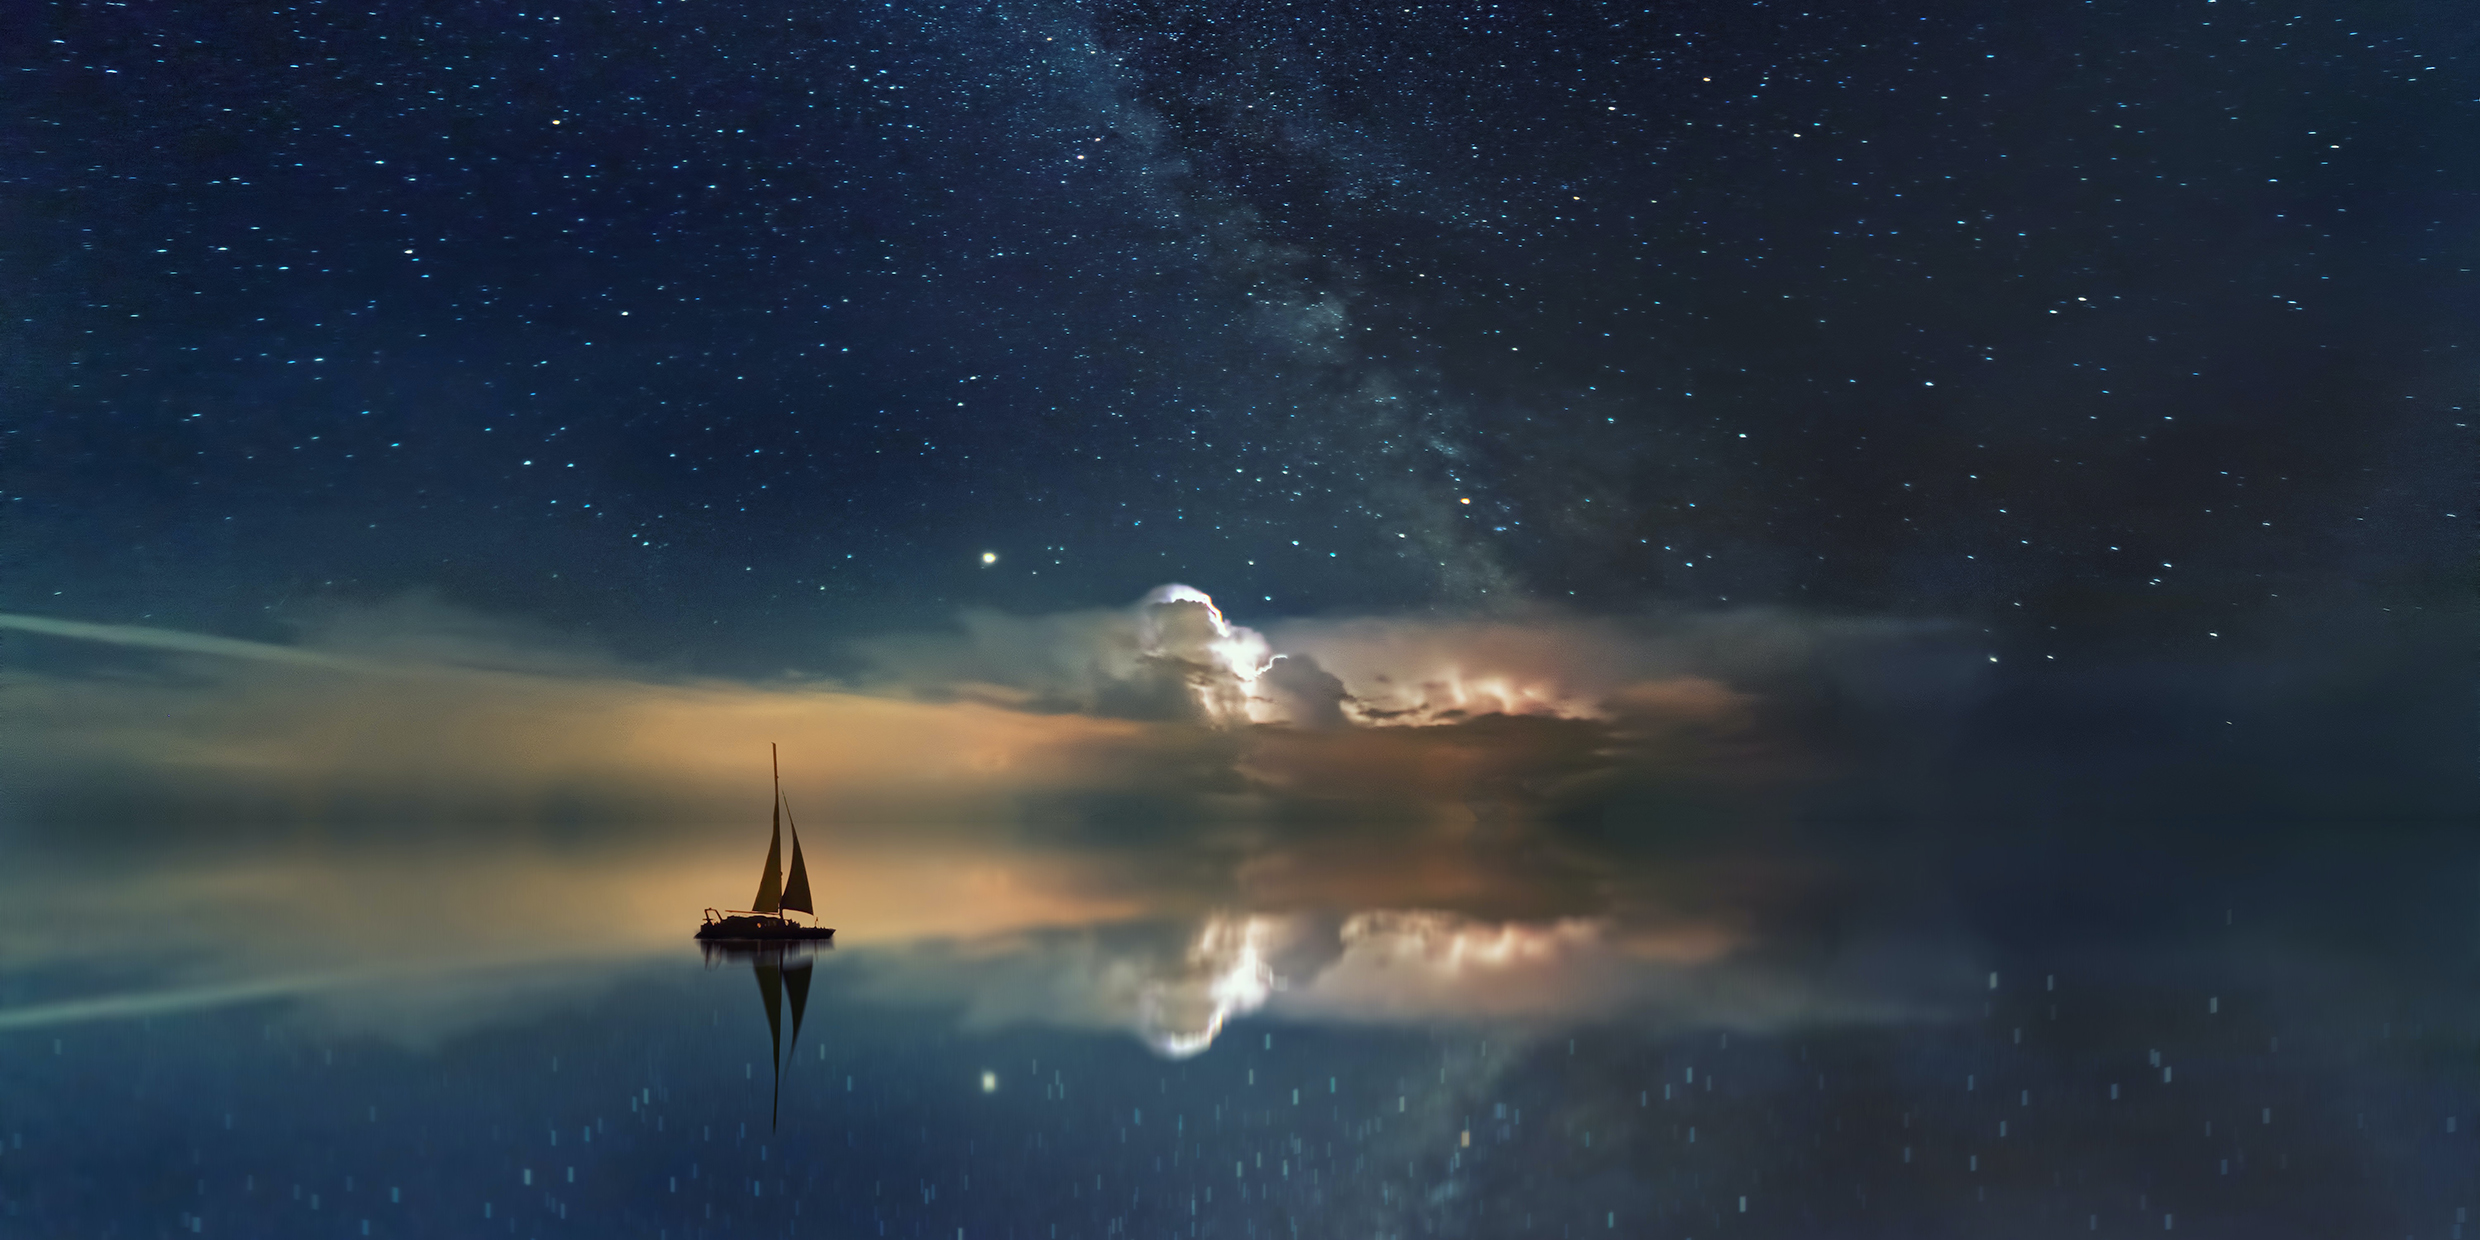 Image of a sailboat on a mirror-like sea which is reflecting the night sky